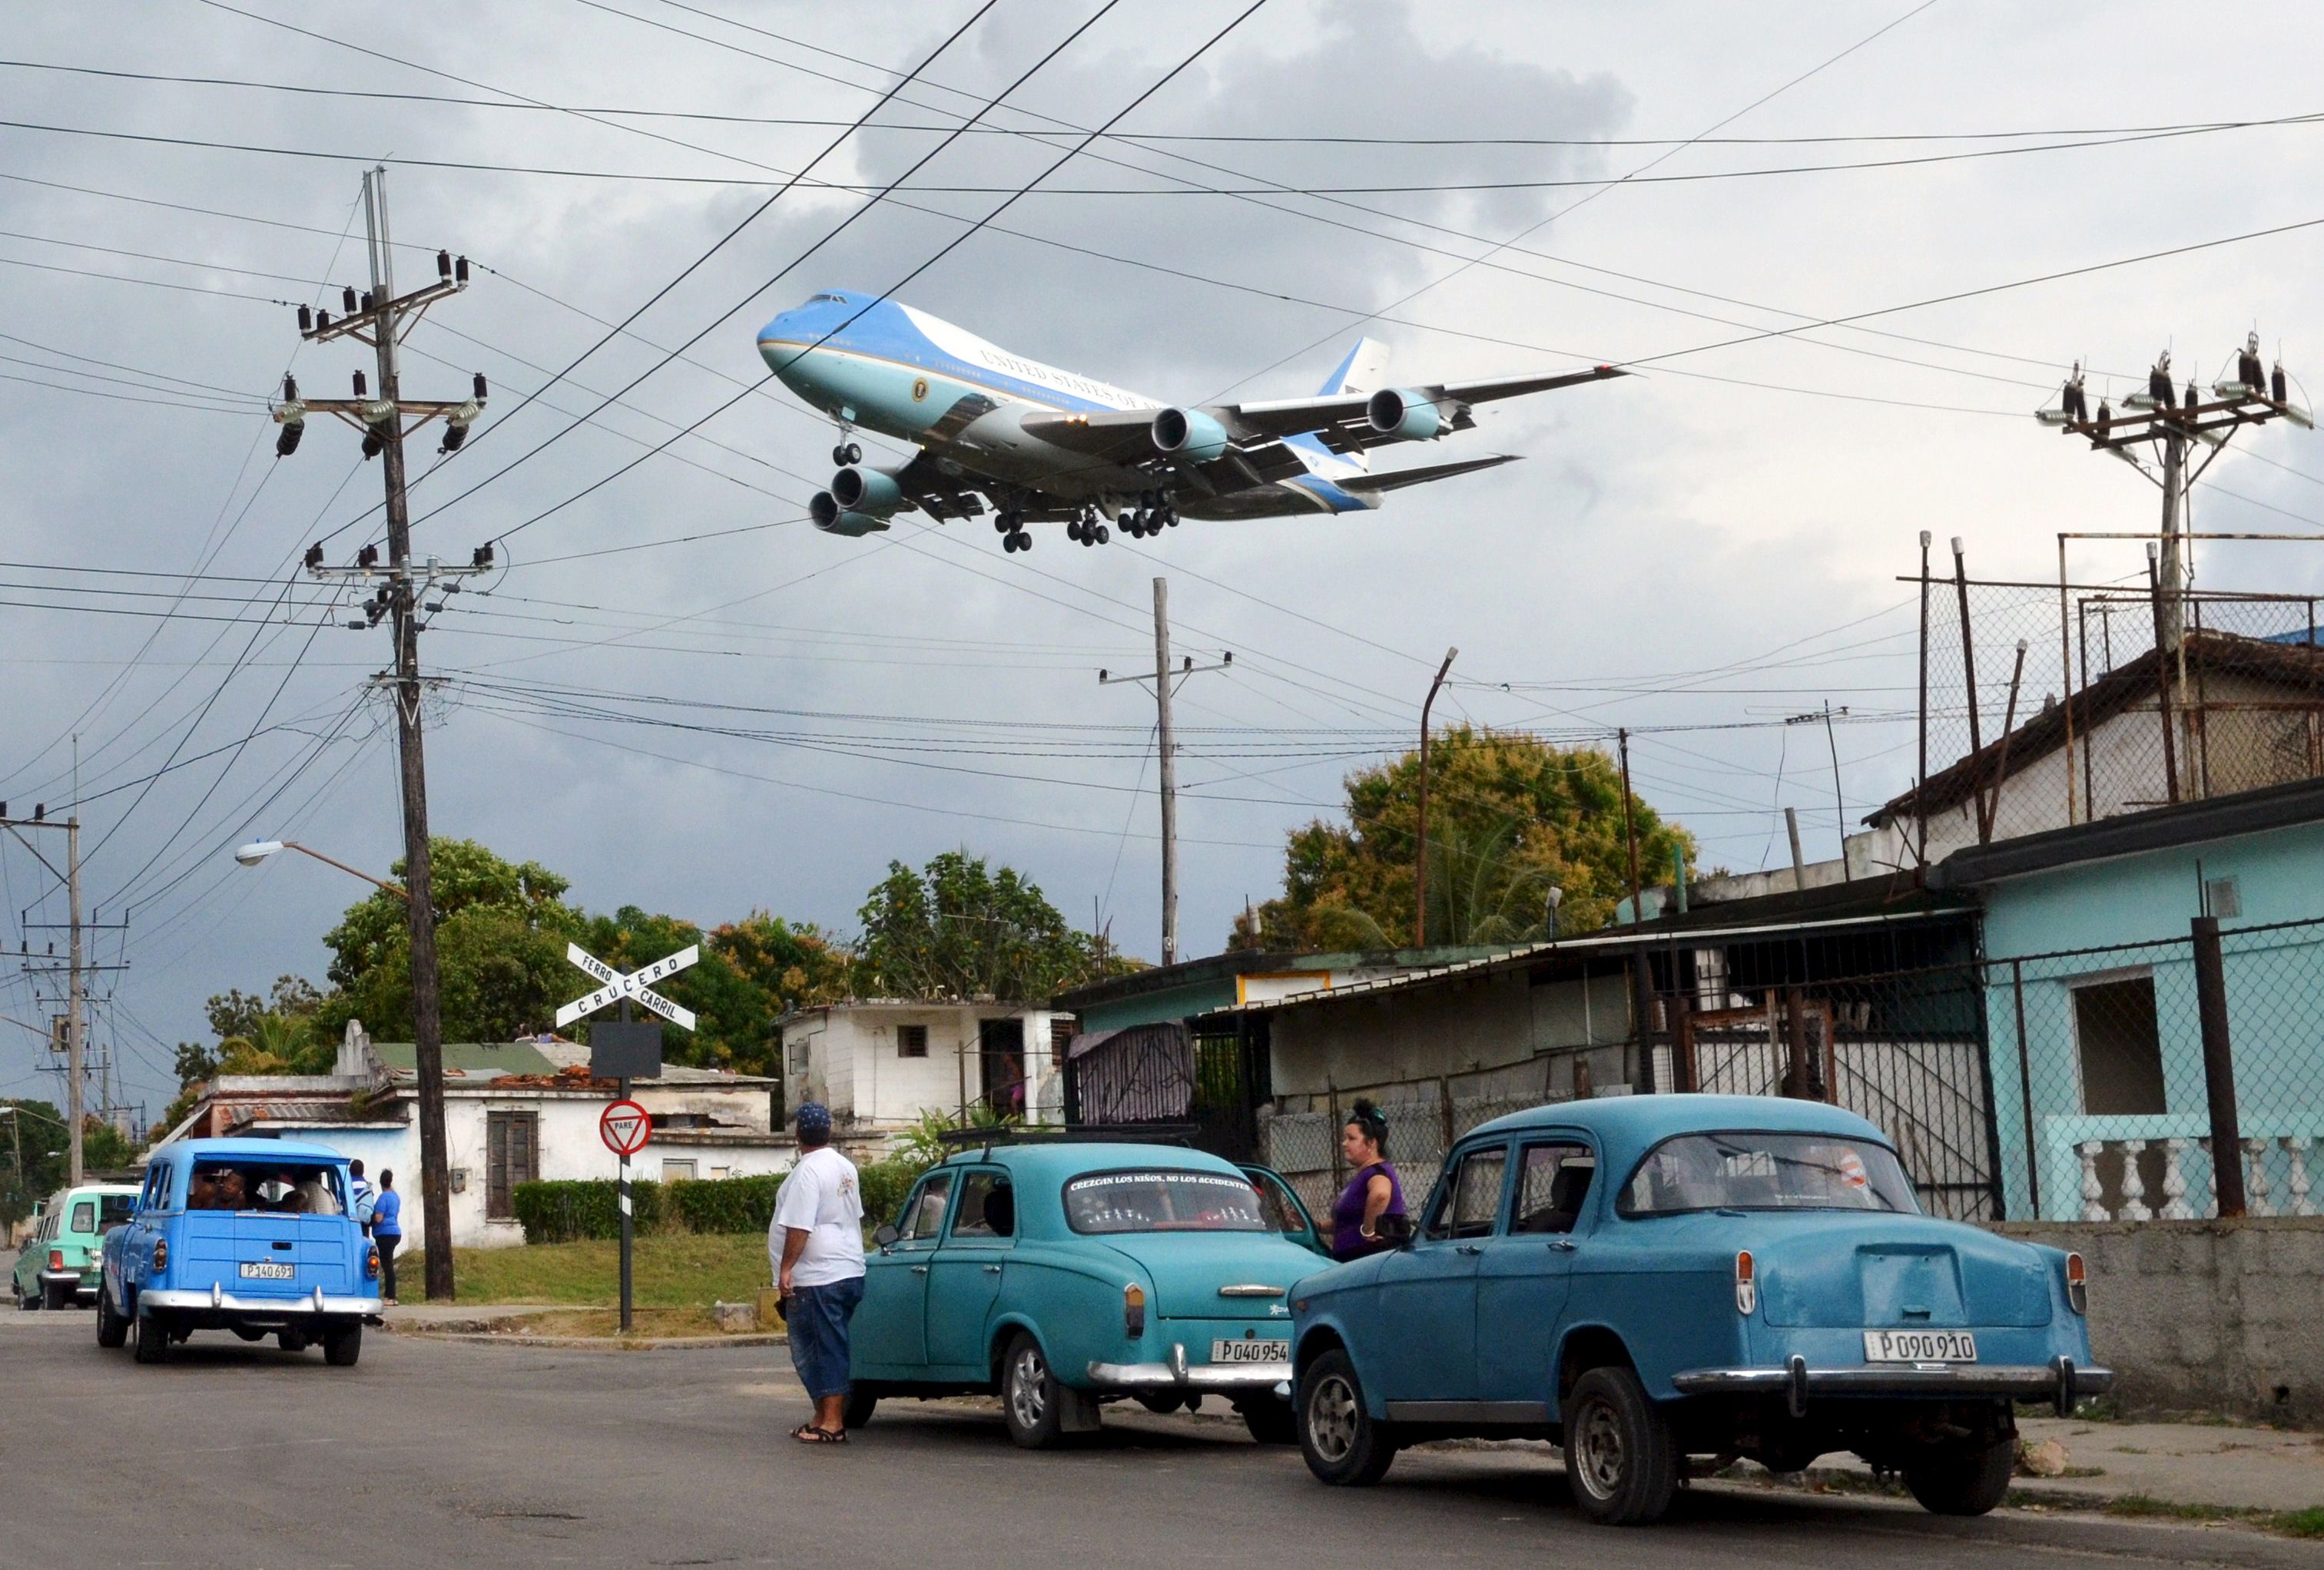 Air Force One carrying U.S. President Barack Obama and his family flies over a neighborhood of Havana as it approaches the runway to land at Havana's international airport, March 20, 2016. REUTERS/Alberto Reyes - RTSBHYK